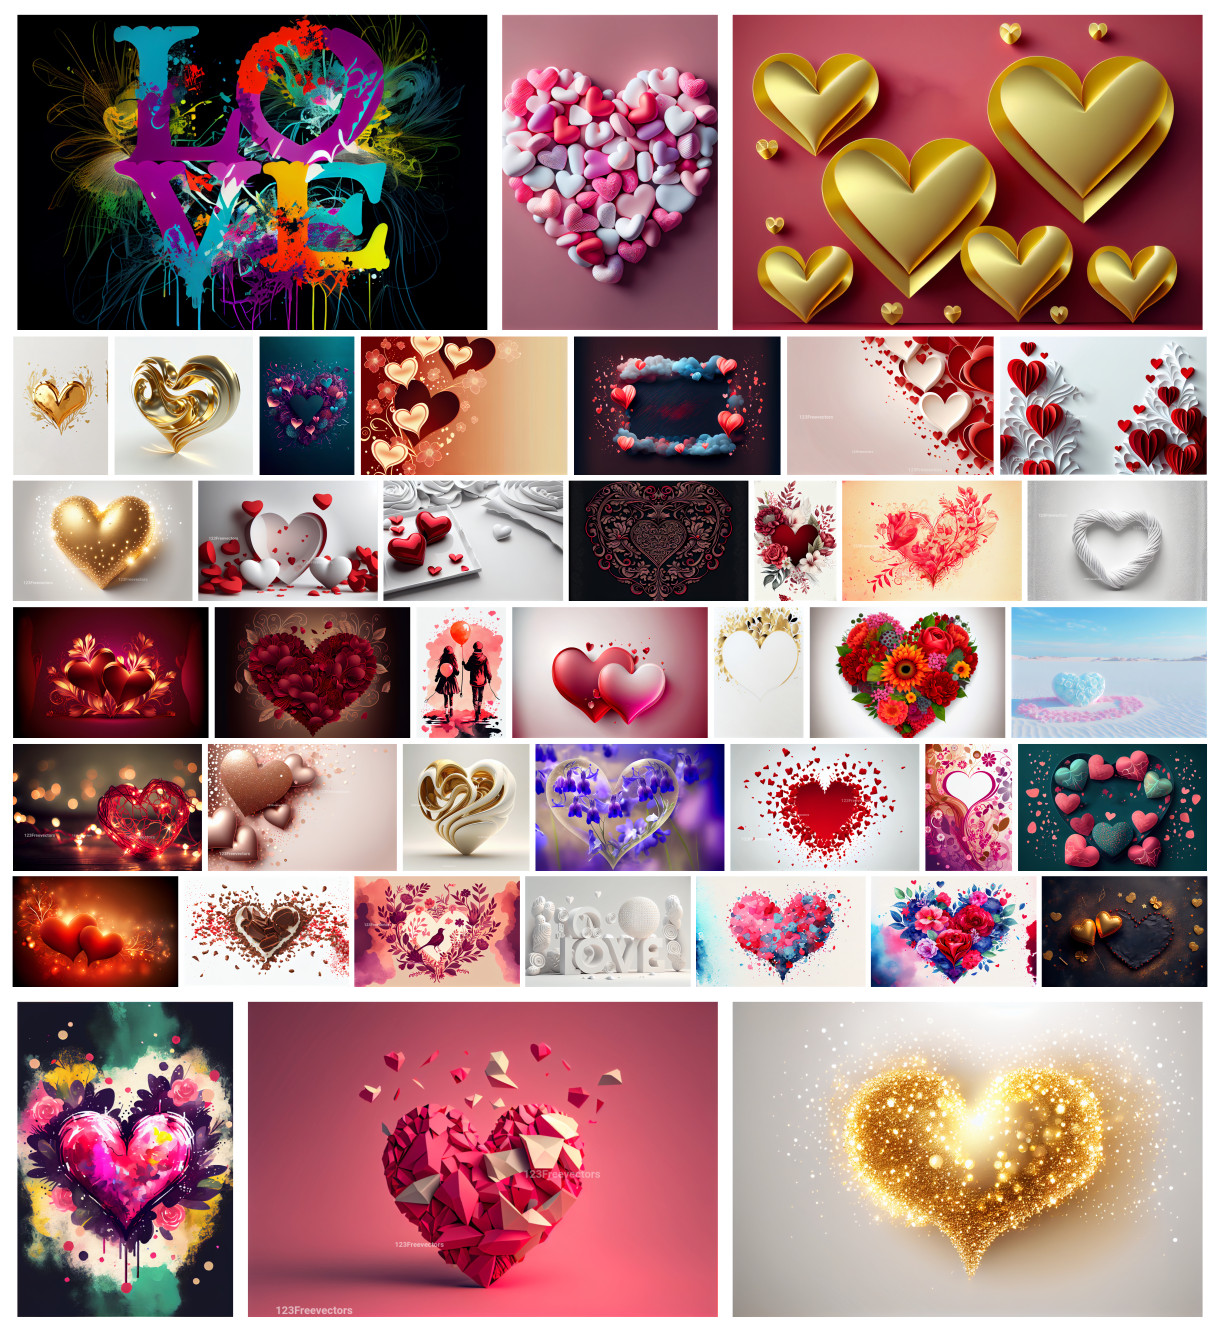 Unveiling 41 Exquisite Valentine’s Image Designs: From 3D Gold to Watercolor Hearts